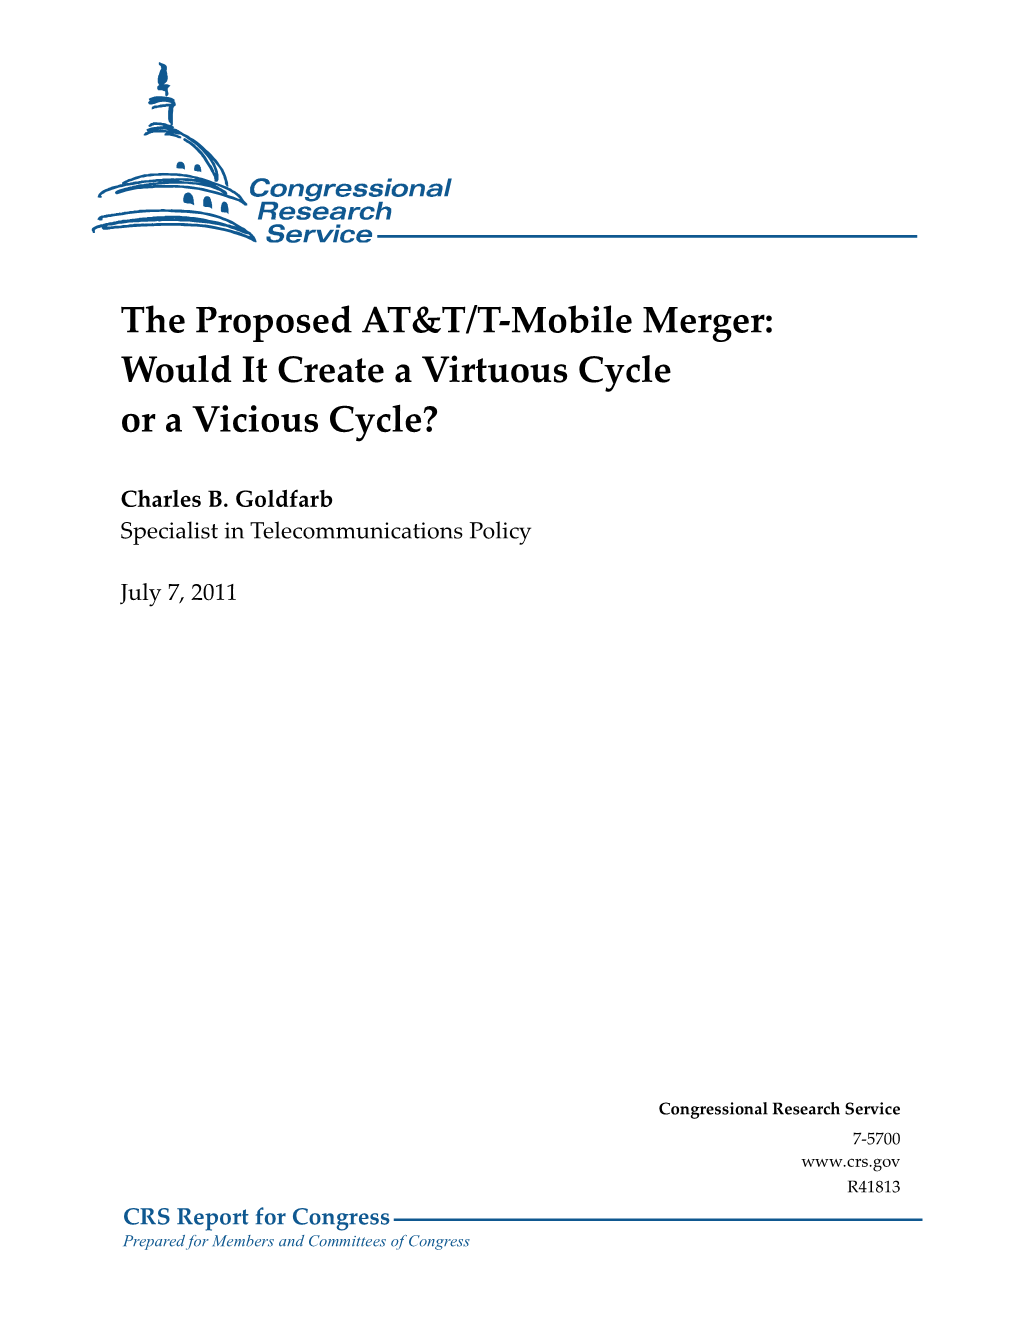 The Proposed AT&T/T-Mobile Merger: Would It Create a Virtuous Cycle Or